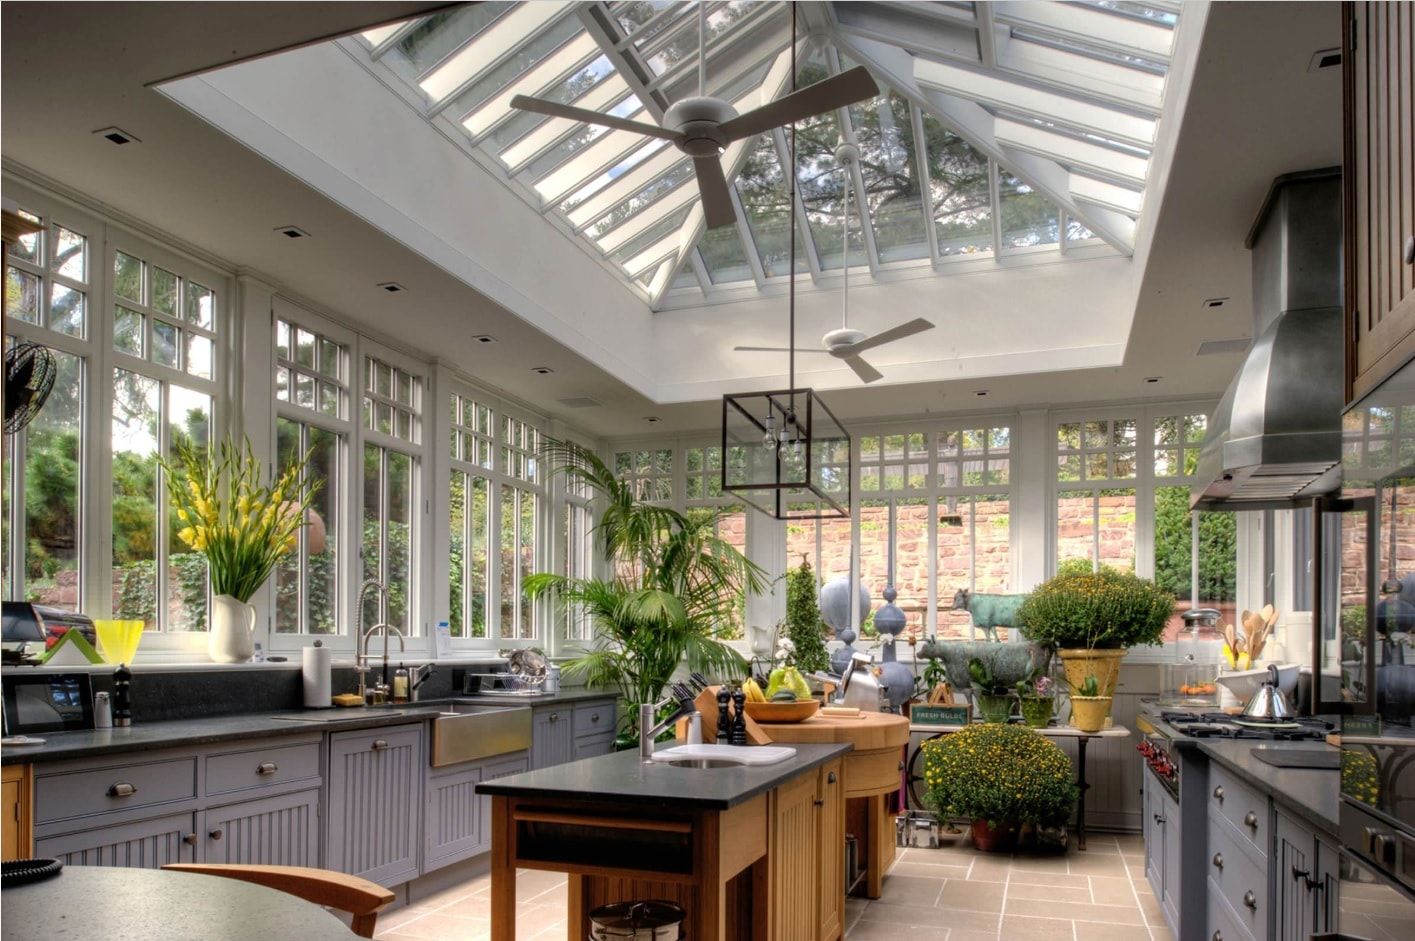 Gorgeous large sunroom looking kitchen with cathedral glass ceiling